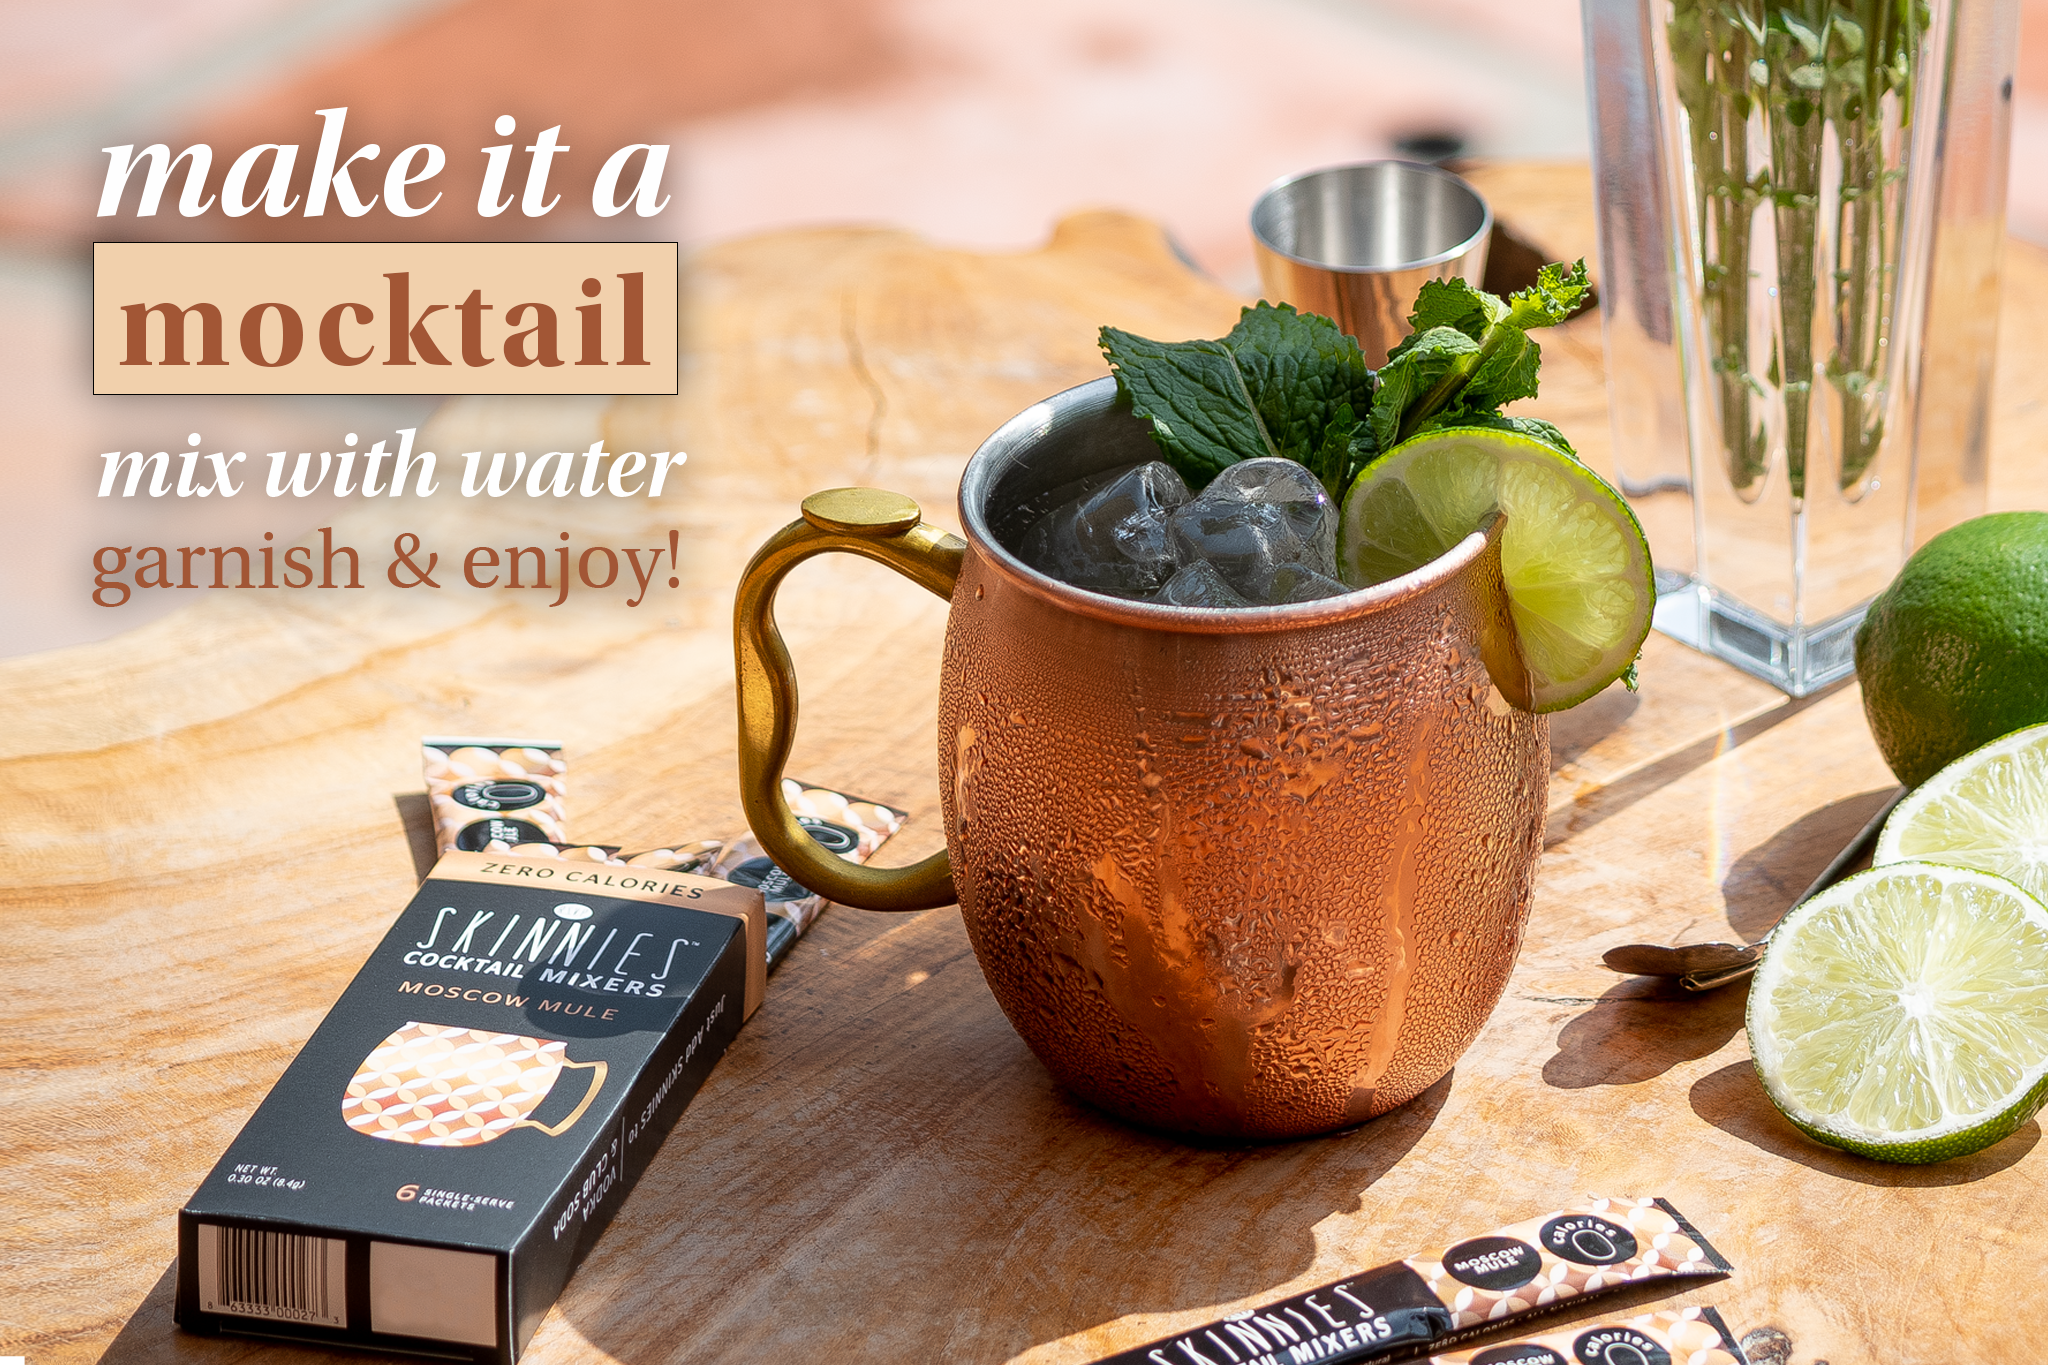 Wallet-friendly Moscow mule offers